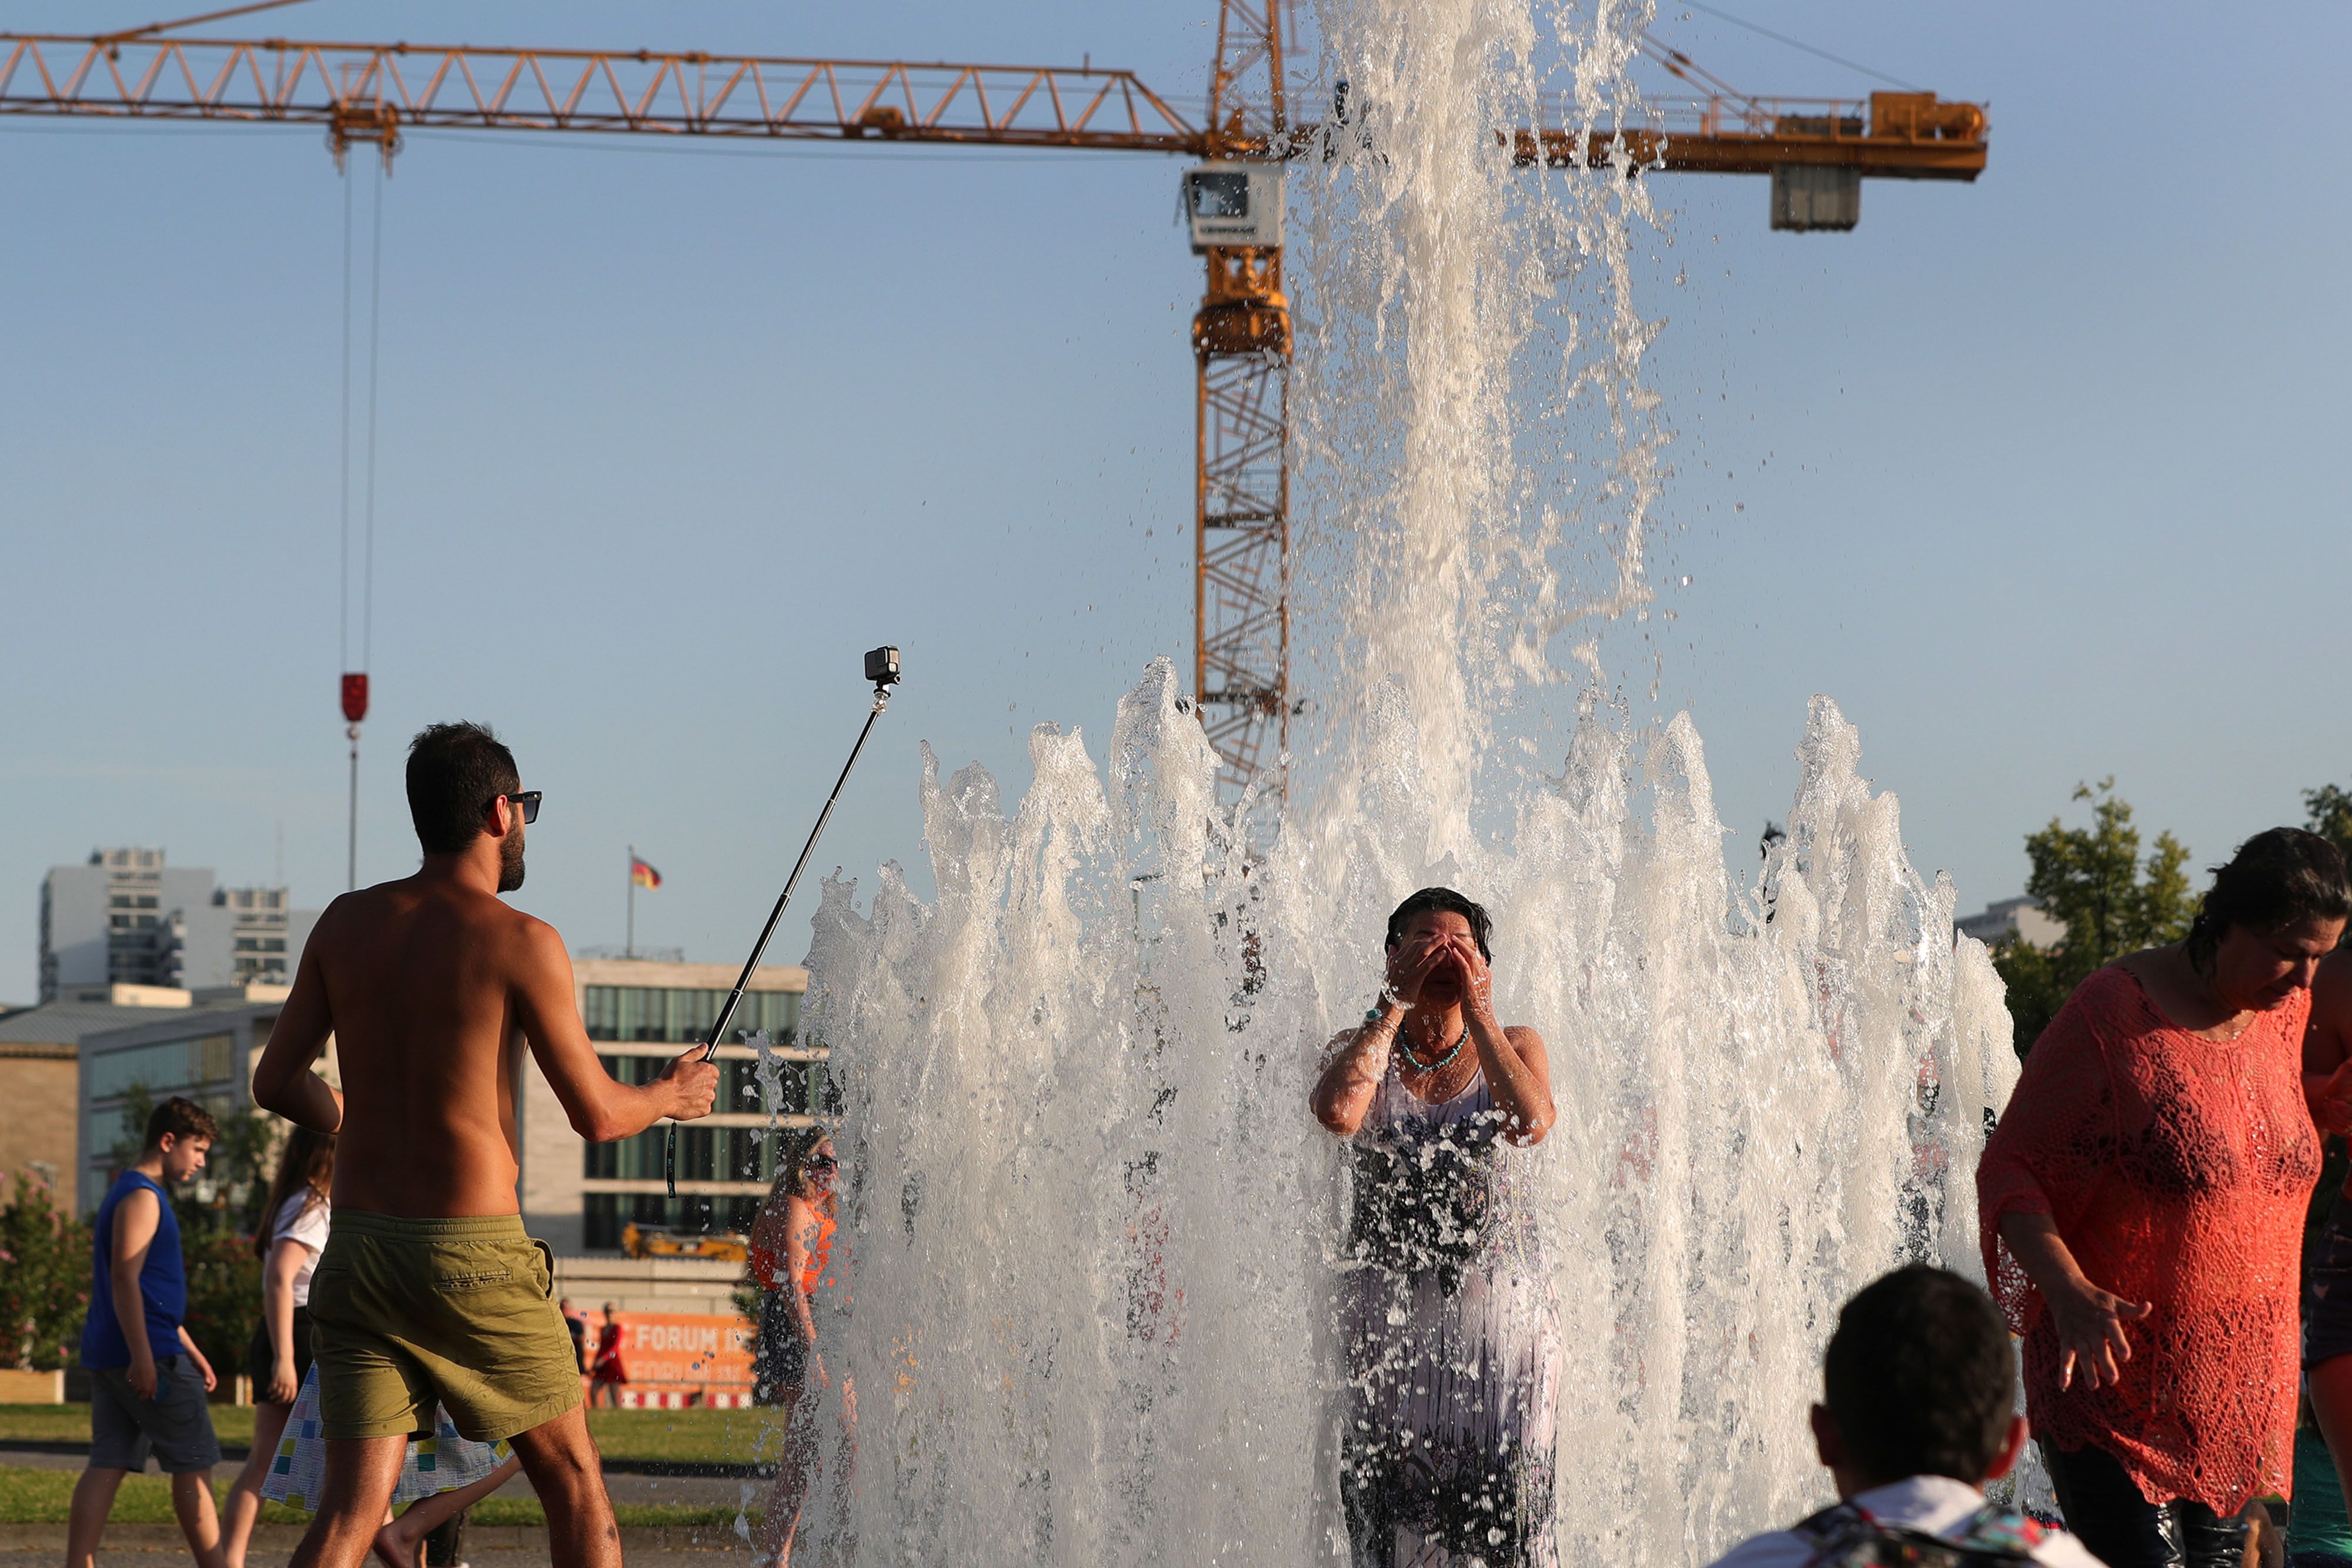 Europe’s Heatwave Was Even Hotter with Impact of Climate Change Research